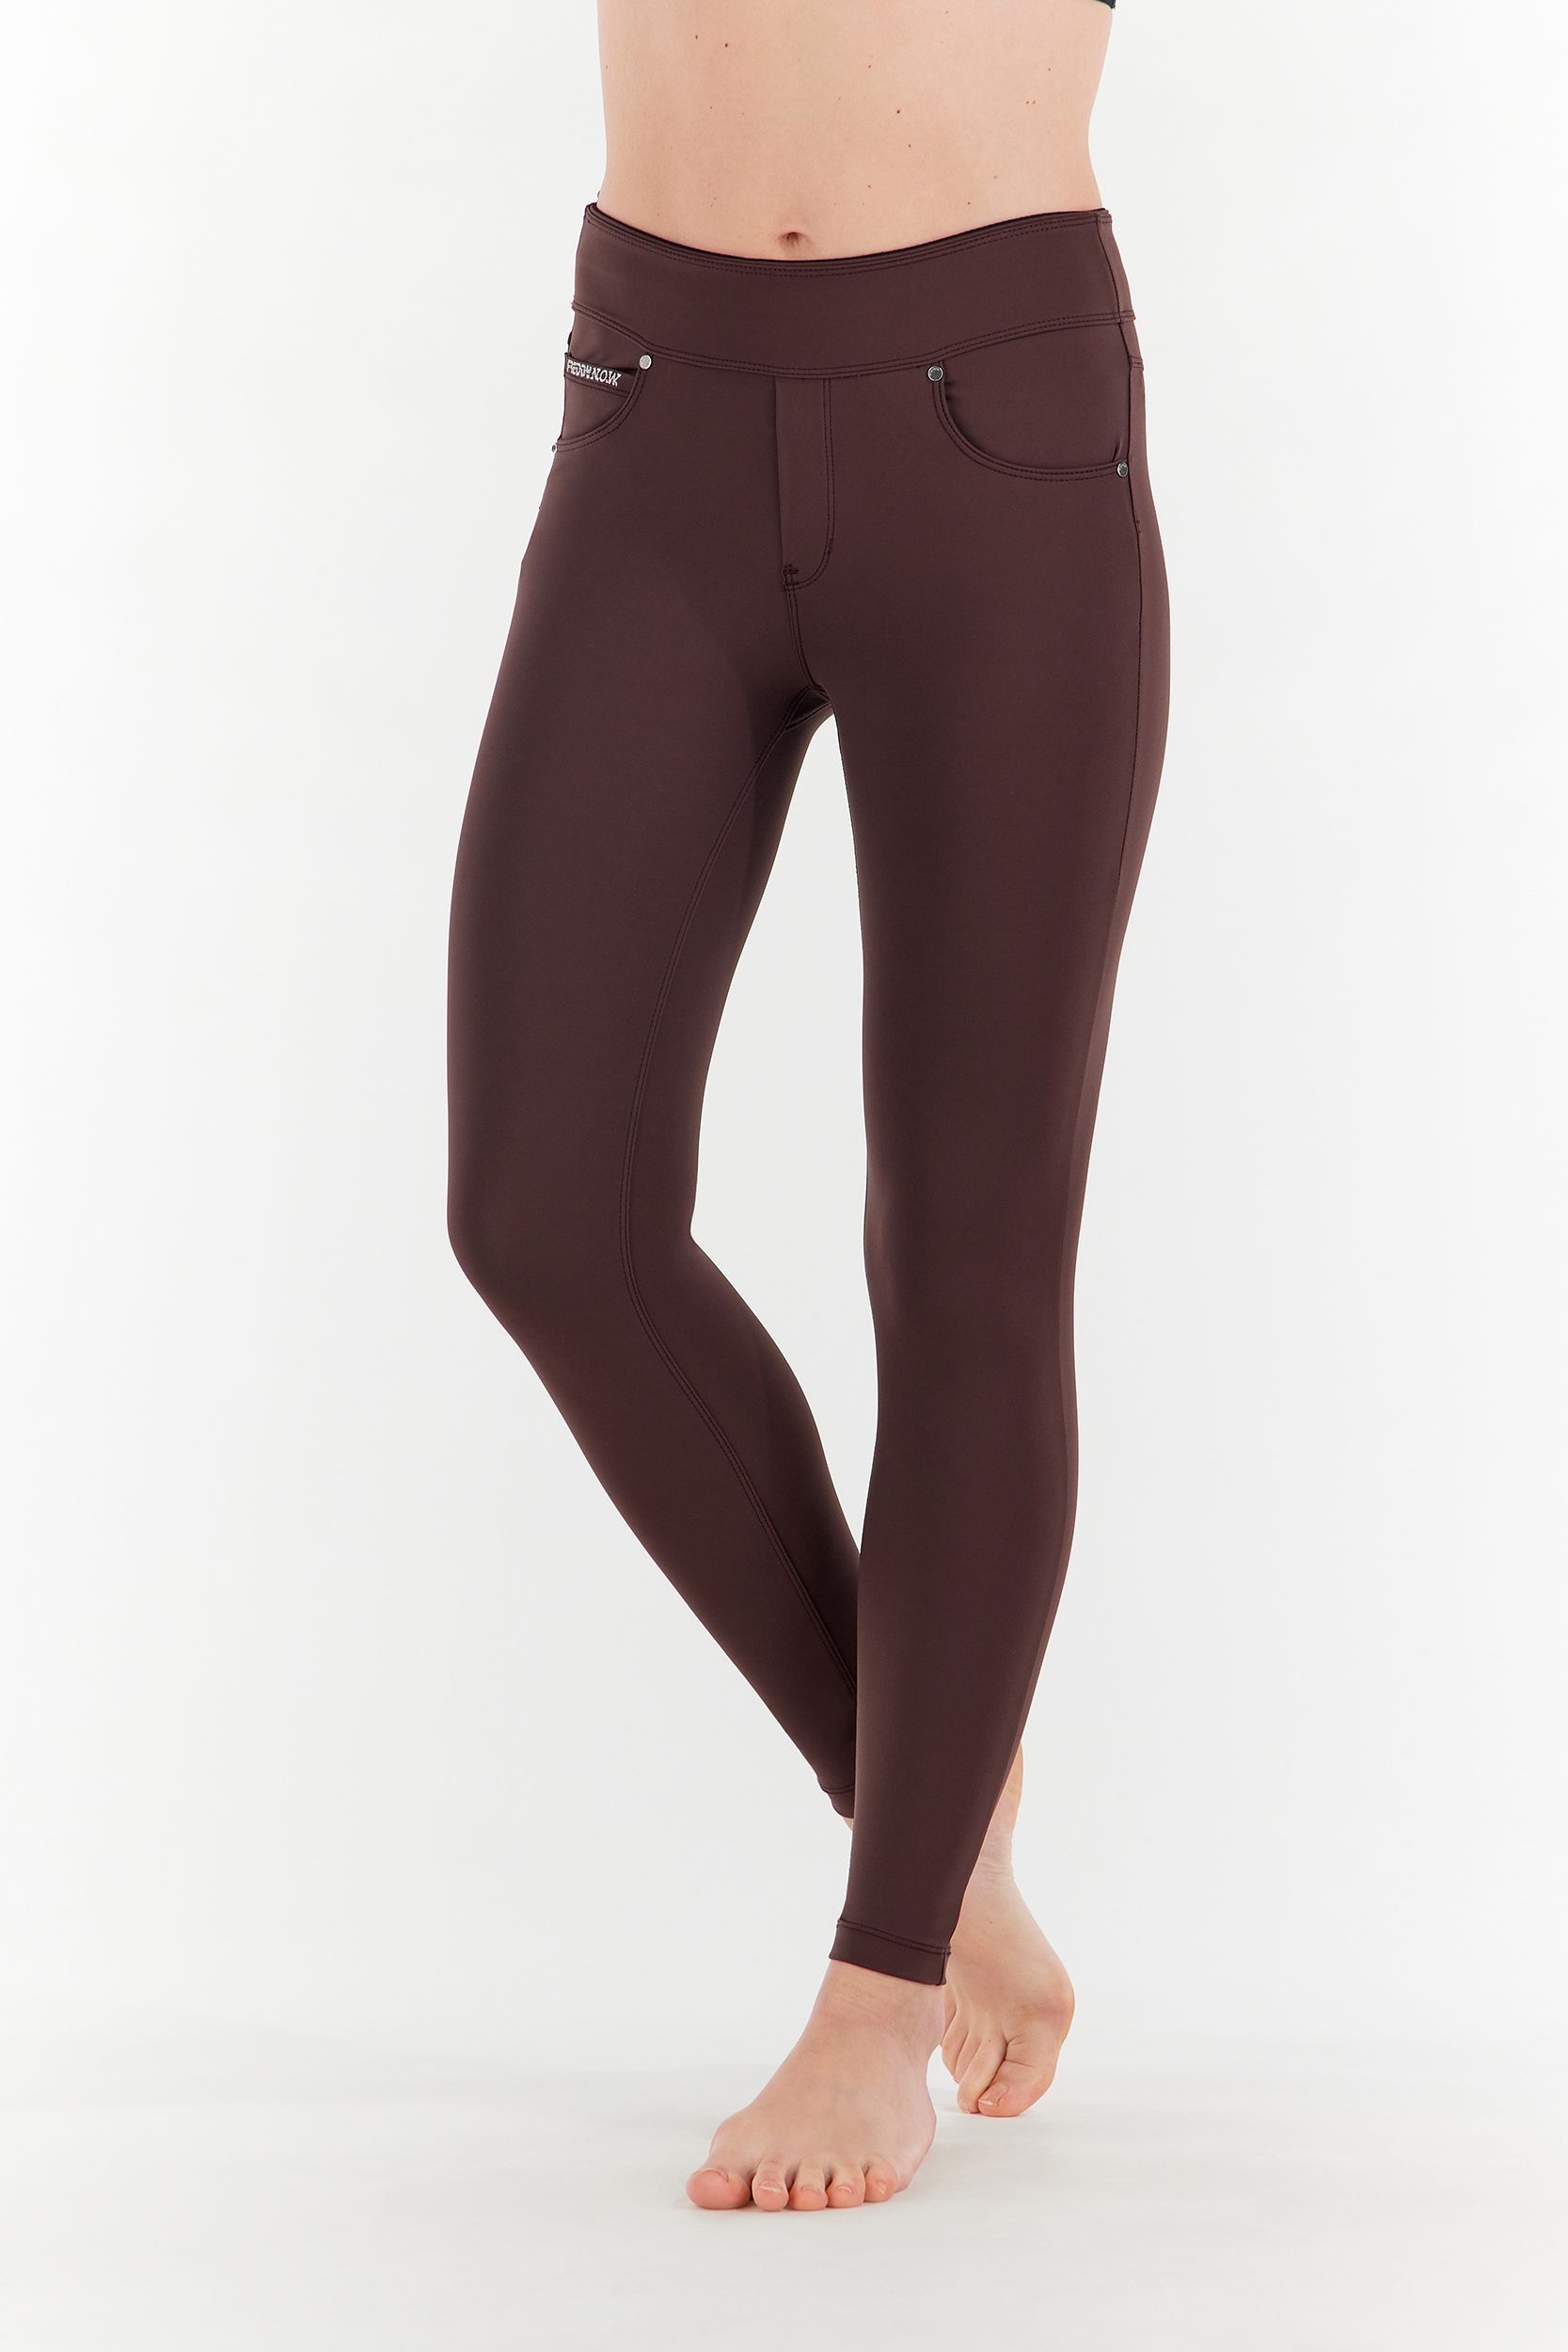 Pleated Pocket Yoga Pants Hip Slimming Solid Color Breathable Solid Color  Legs | eBay